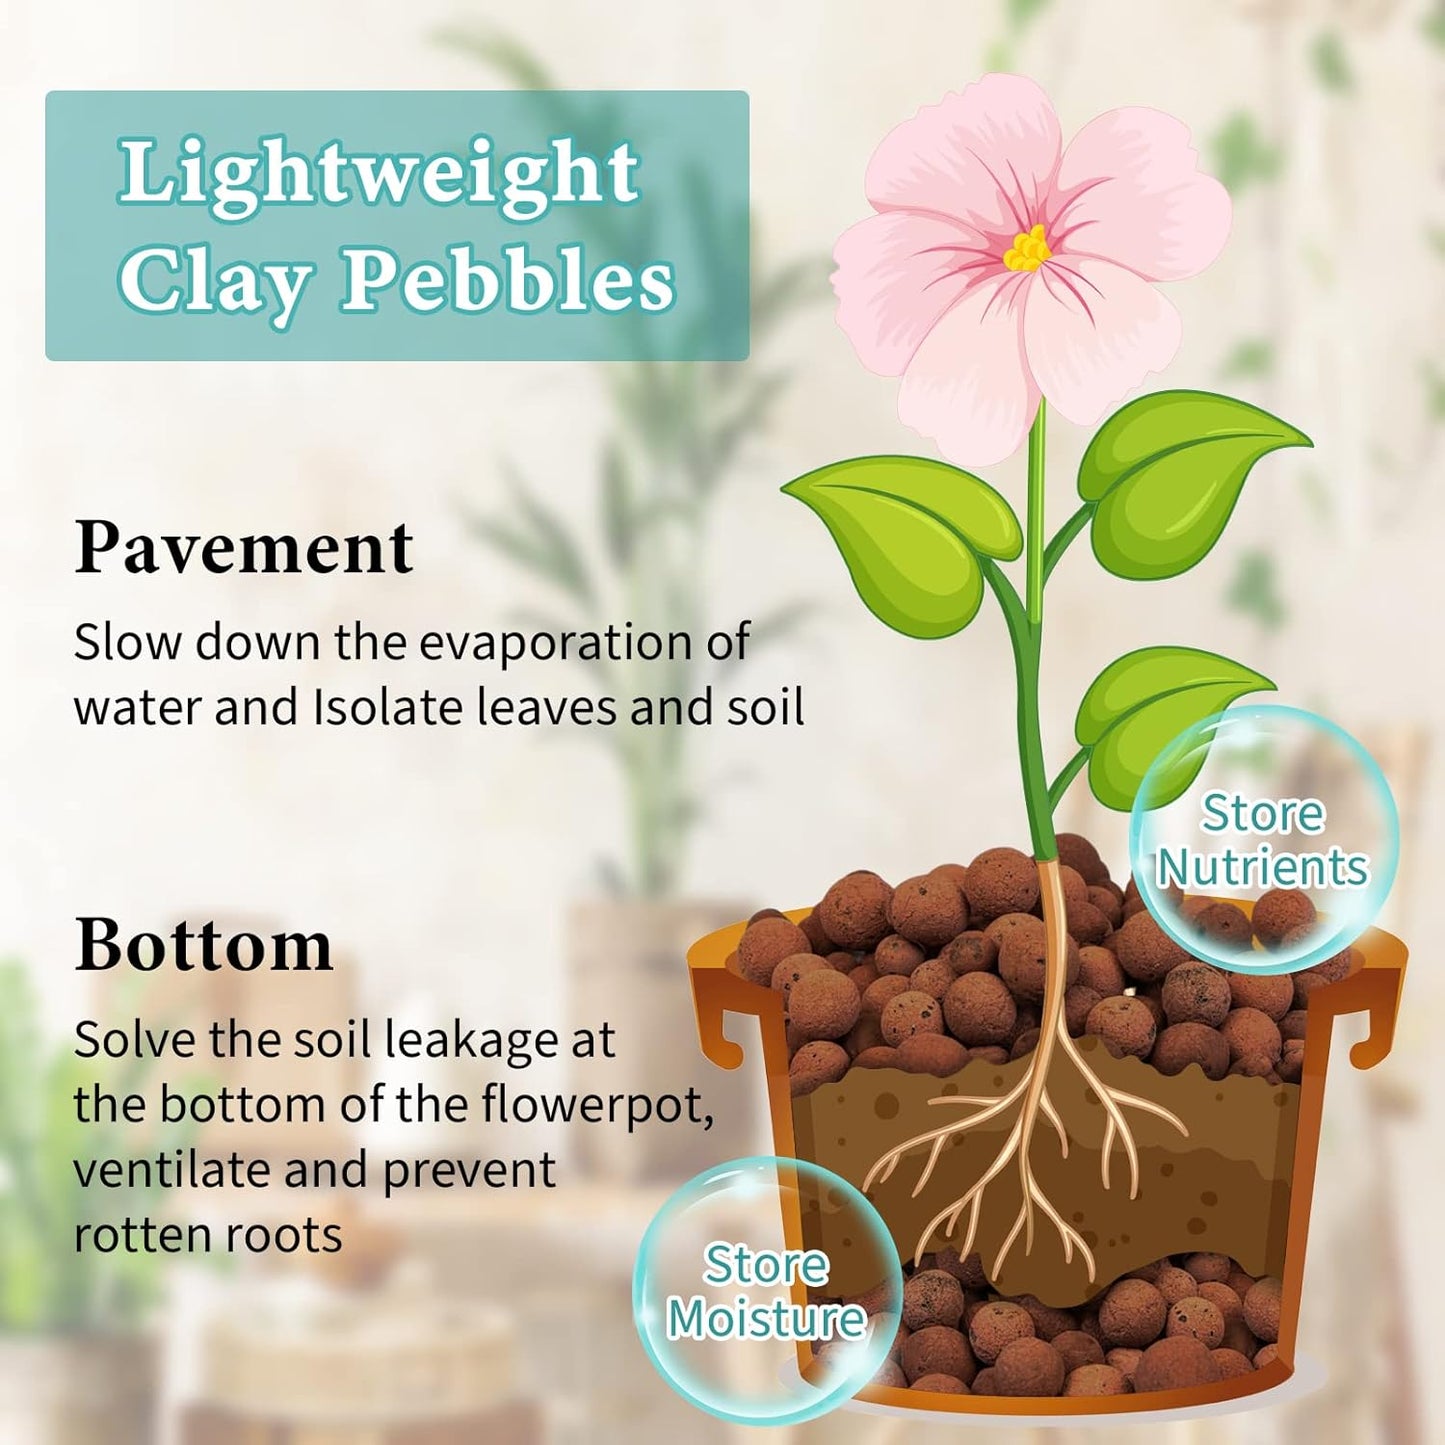 15 LBS Organic Expanded Clay Pebbles, 4Mm -16Mm Light Expanded Clay Aggregate, Natural Clay Pebbles for Hydroponic & Aquaponics Growing, Orchid Potting Mix, Dutch Buckets, Drainage